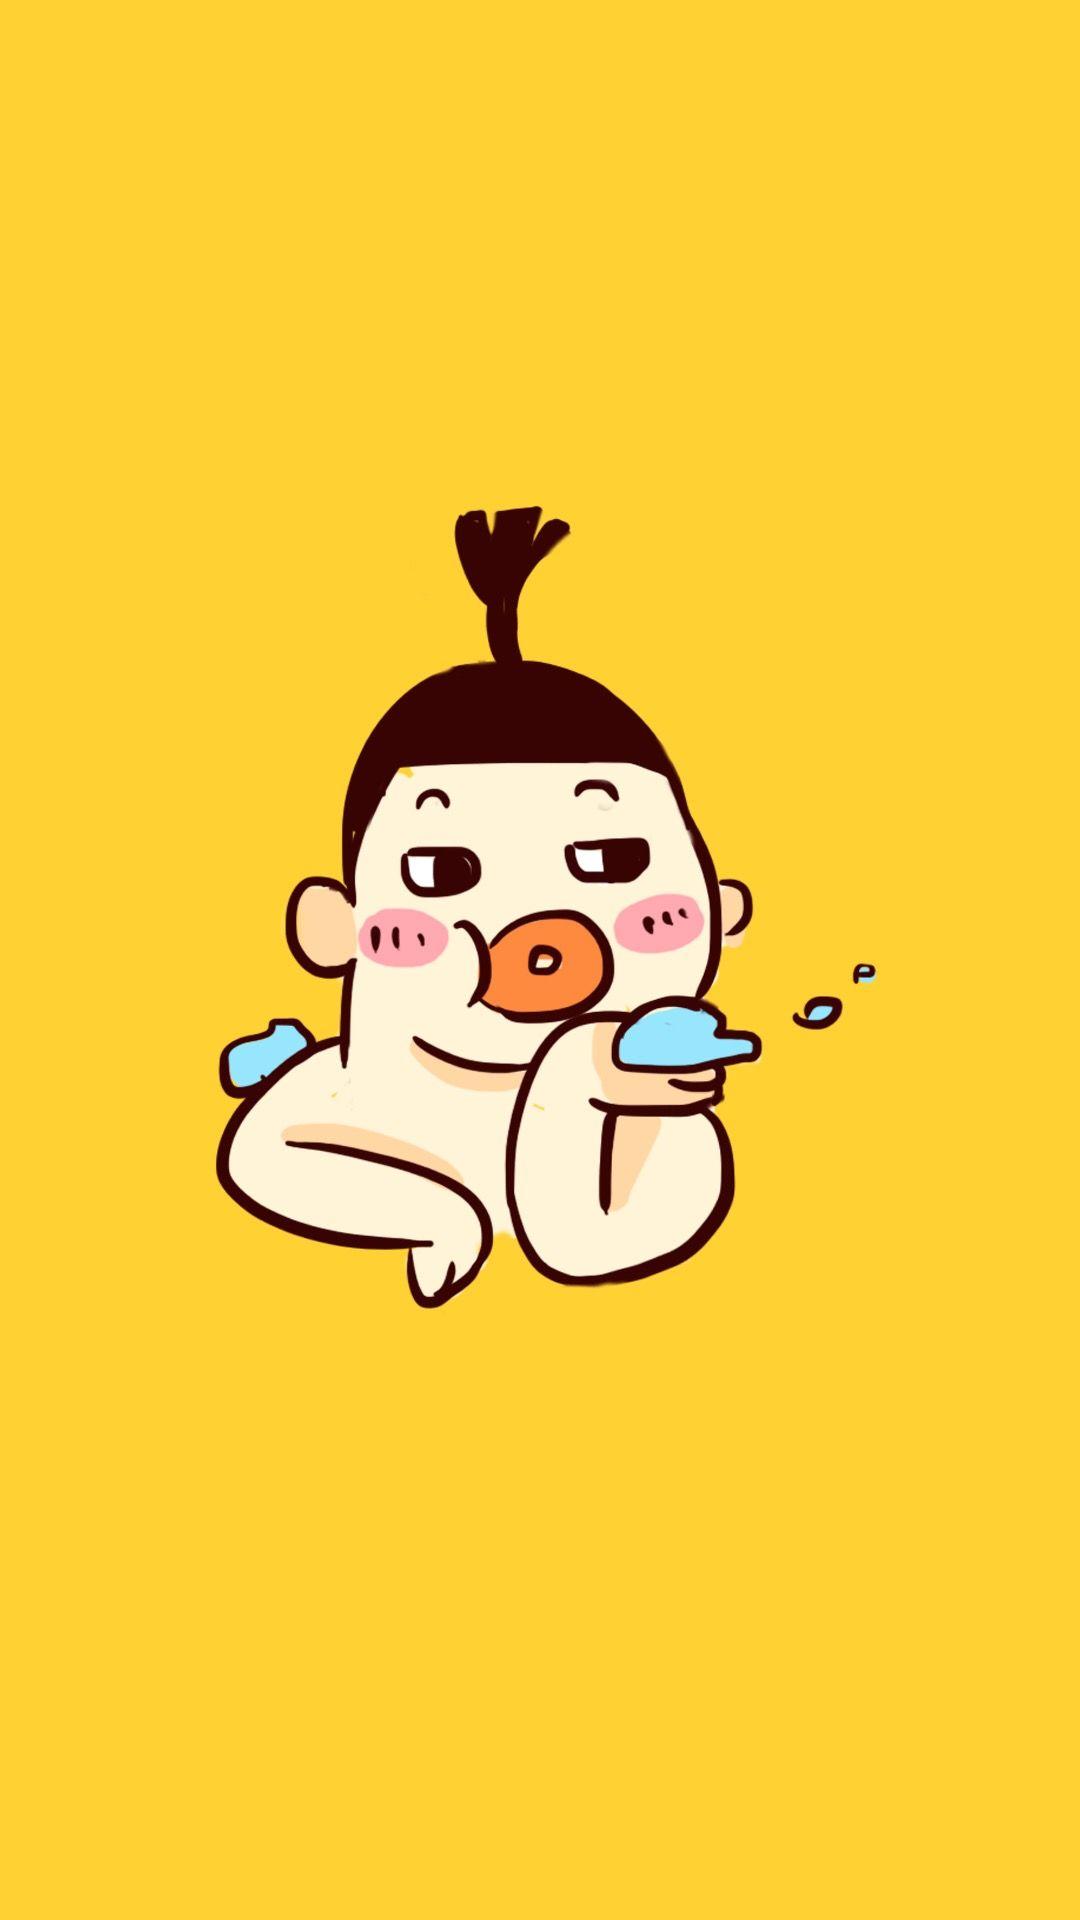 1080 x 1920 · jpeg - BABY CARTOON - Tap to see more cute cartoon wallpapers! - @mobile9 ...